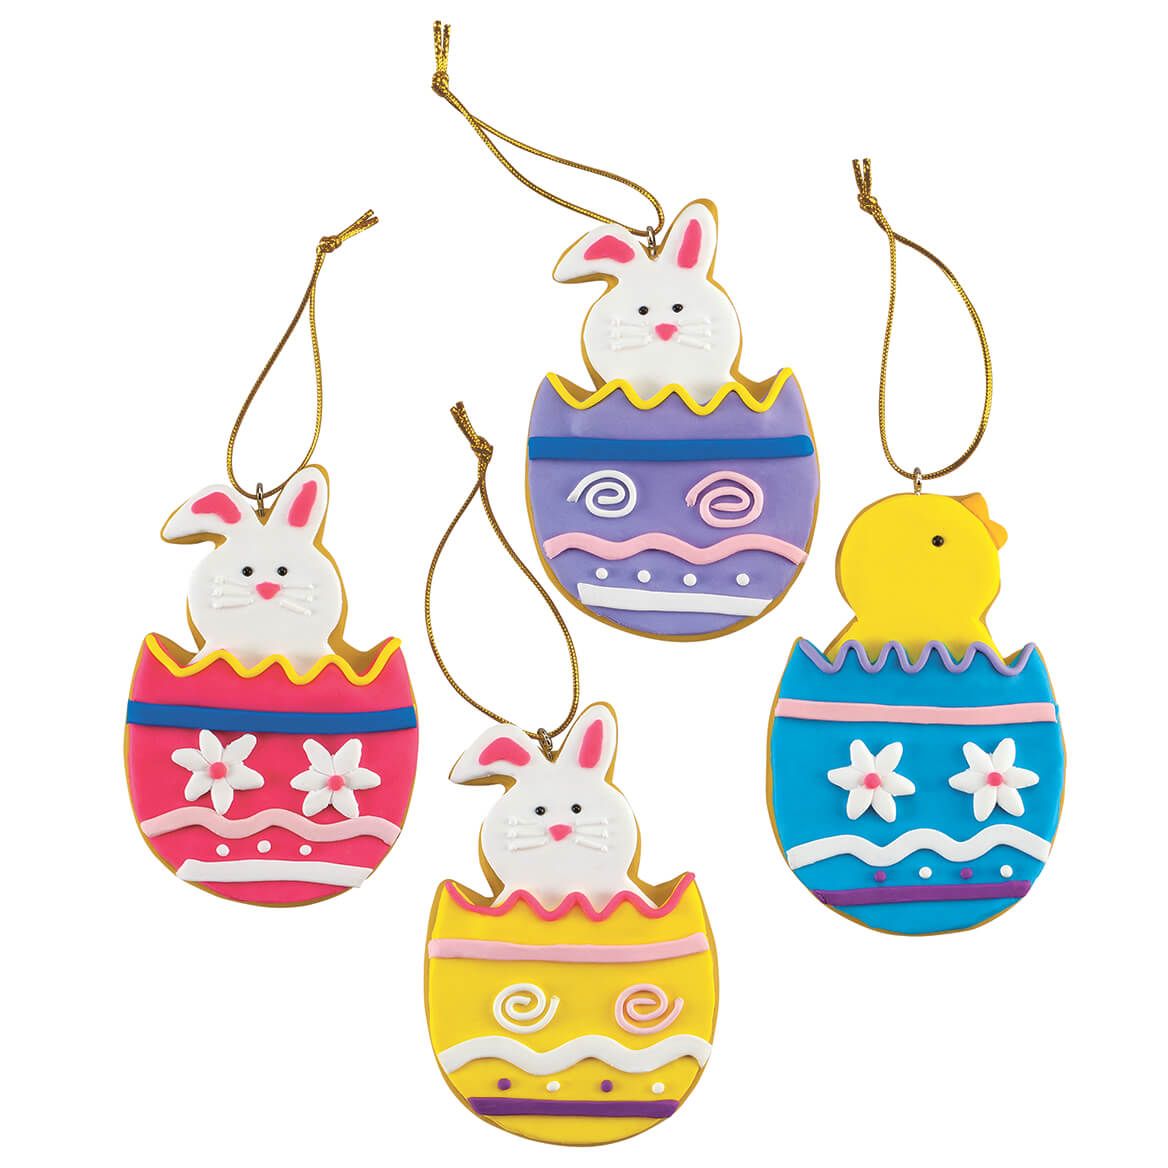 Claydough Easter Ornaments, Set of 12 by Holiday Peak™ + '-' + 371224